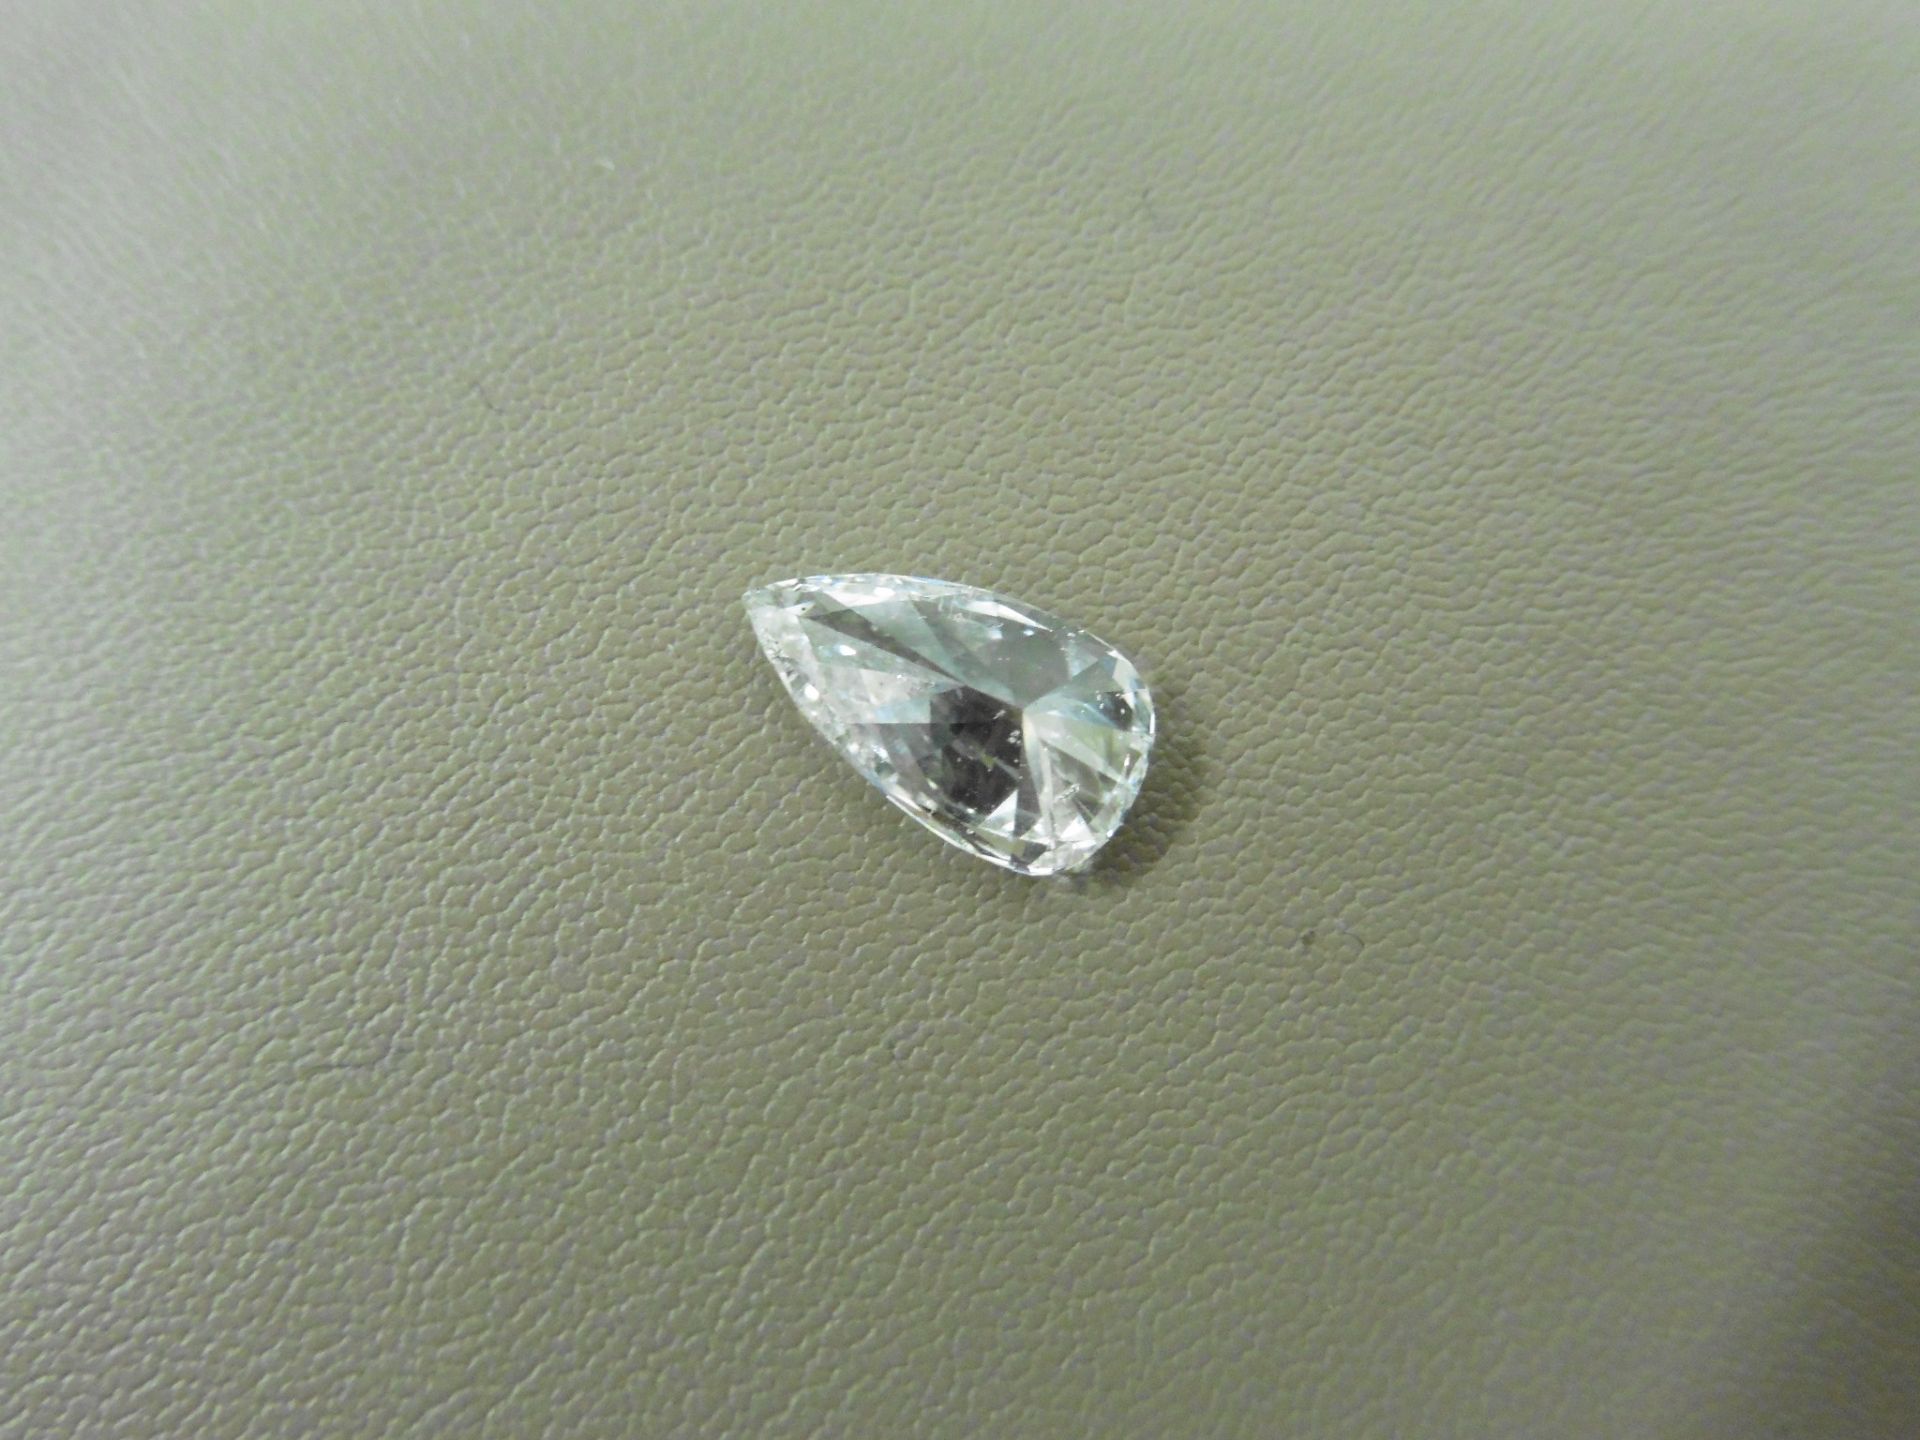 1.67ct enhanced pear shaped diamond. E colour and Si2clarity ( laser drilled ). EGL certification. - Image 4 of 5